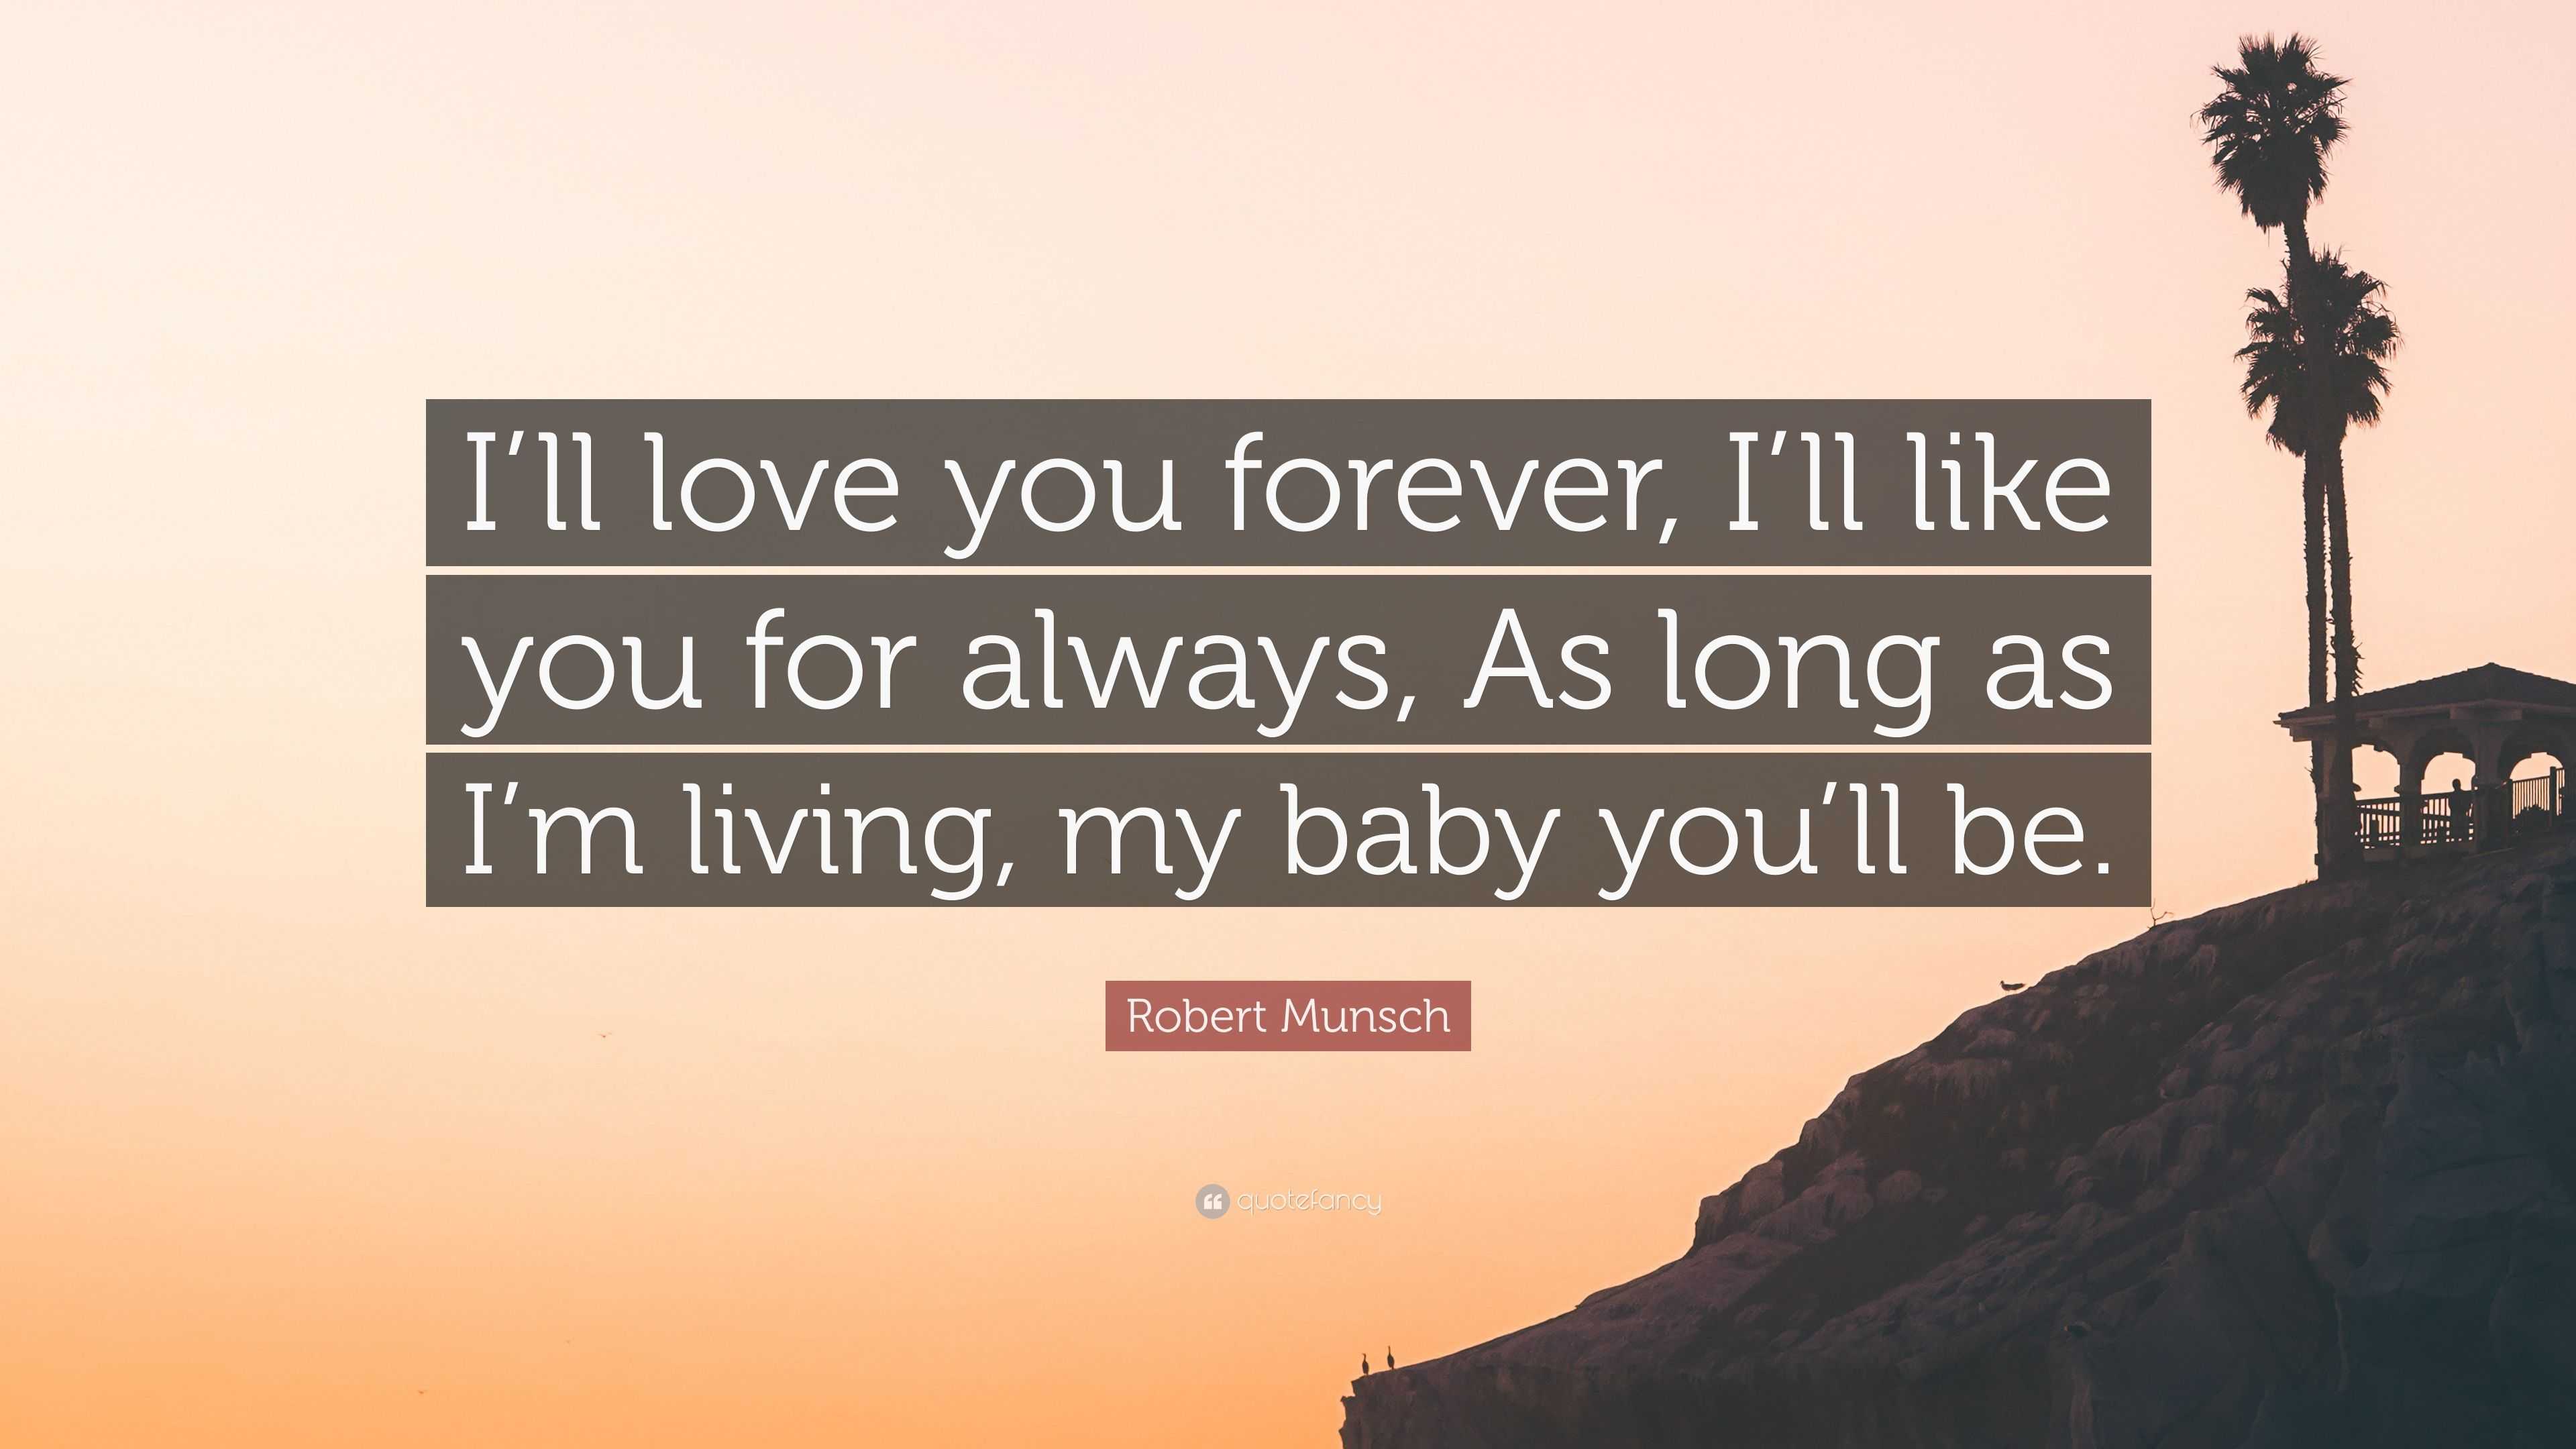 Robert Munsch Quote: "I'll love you forever, I'll like you ...